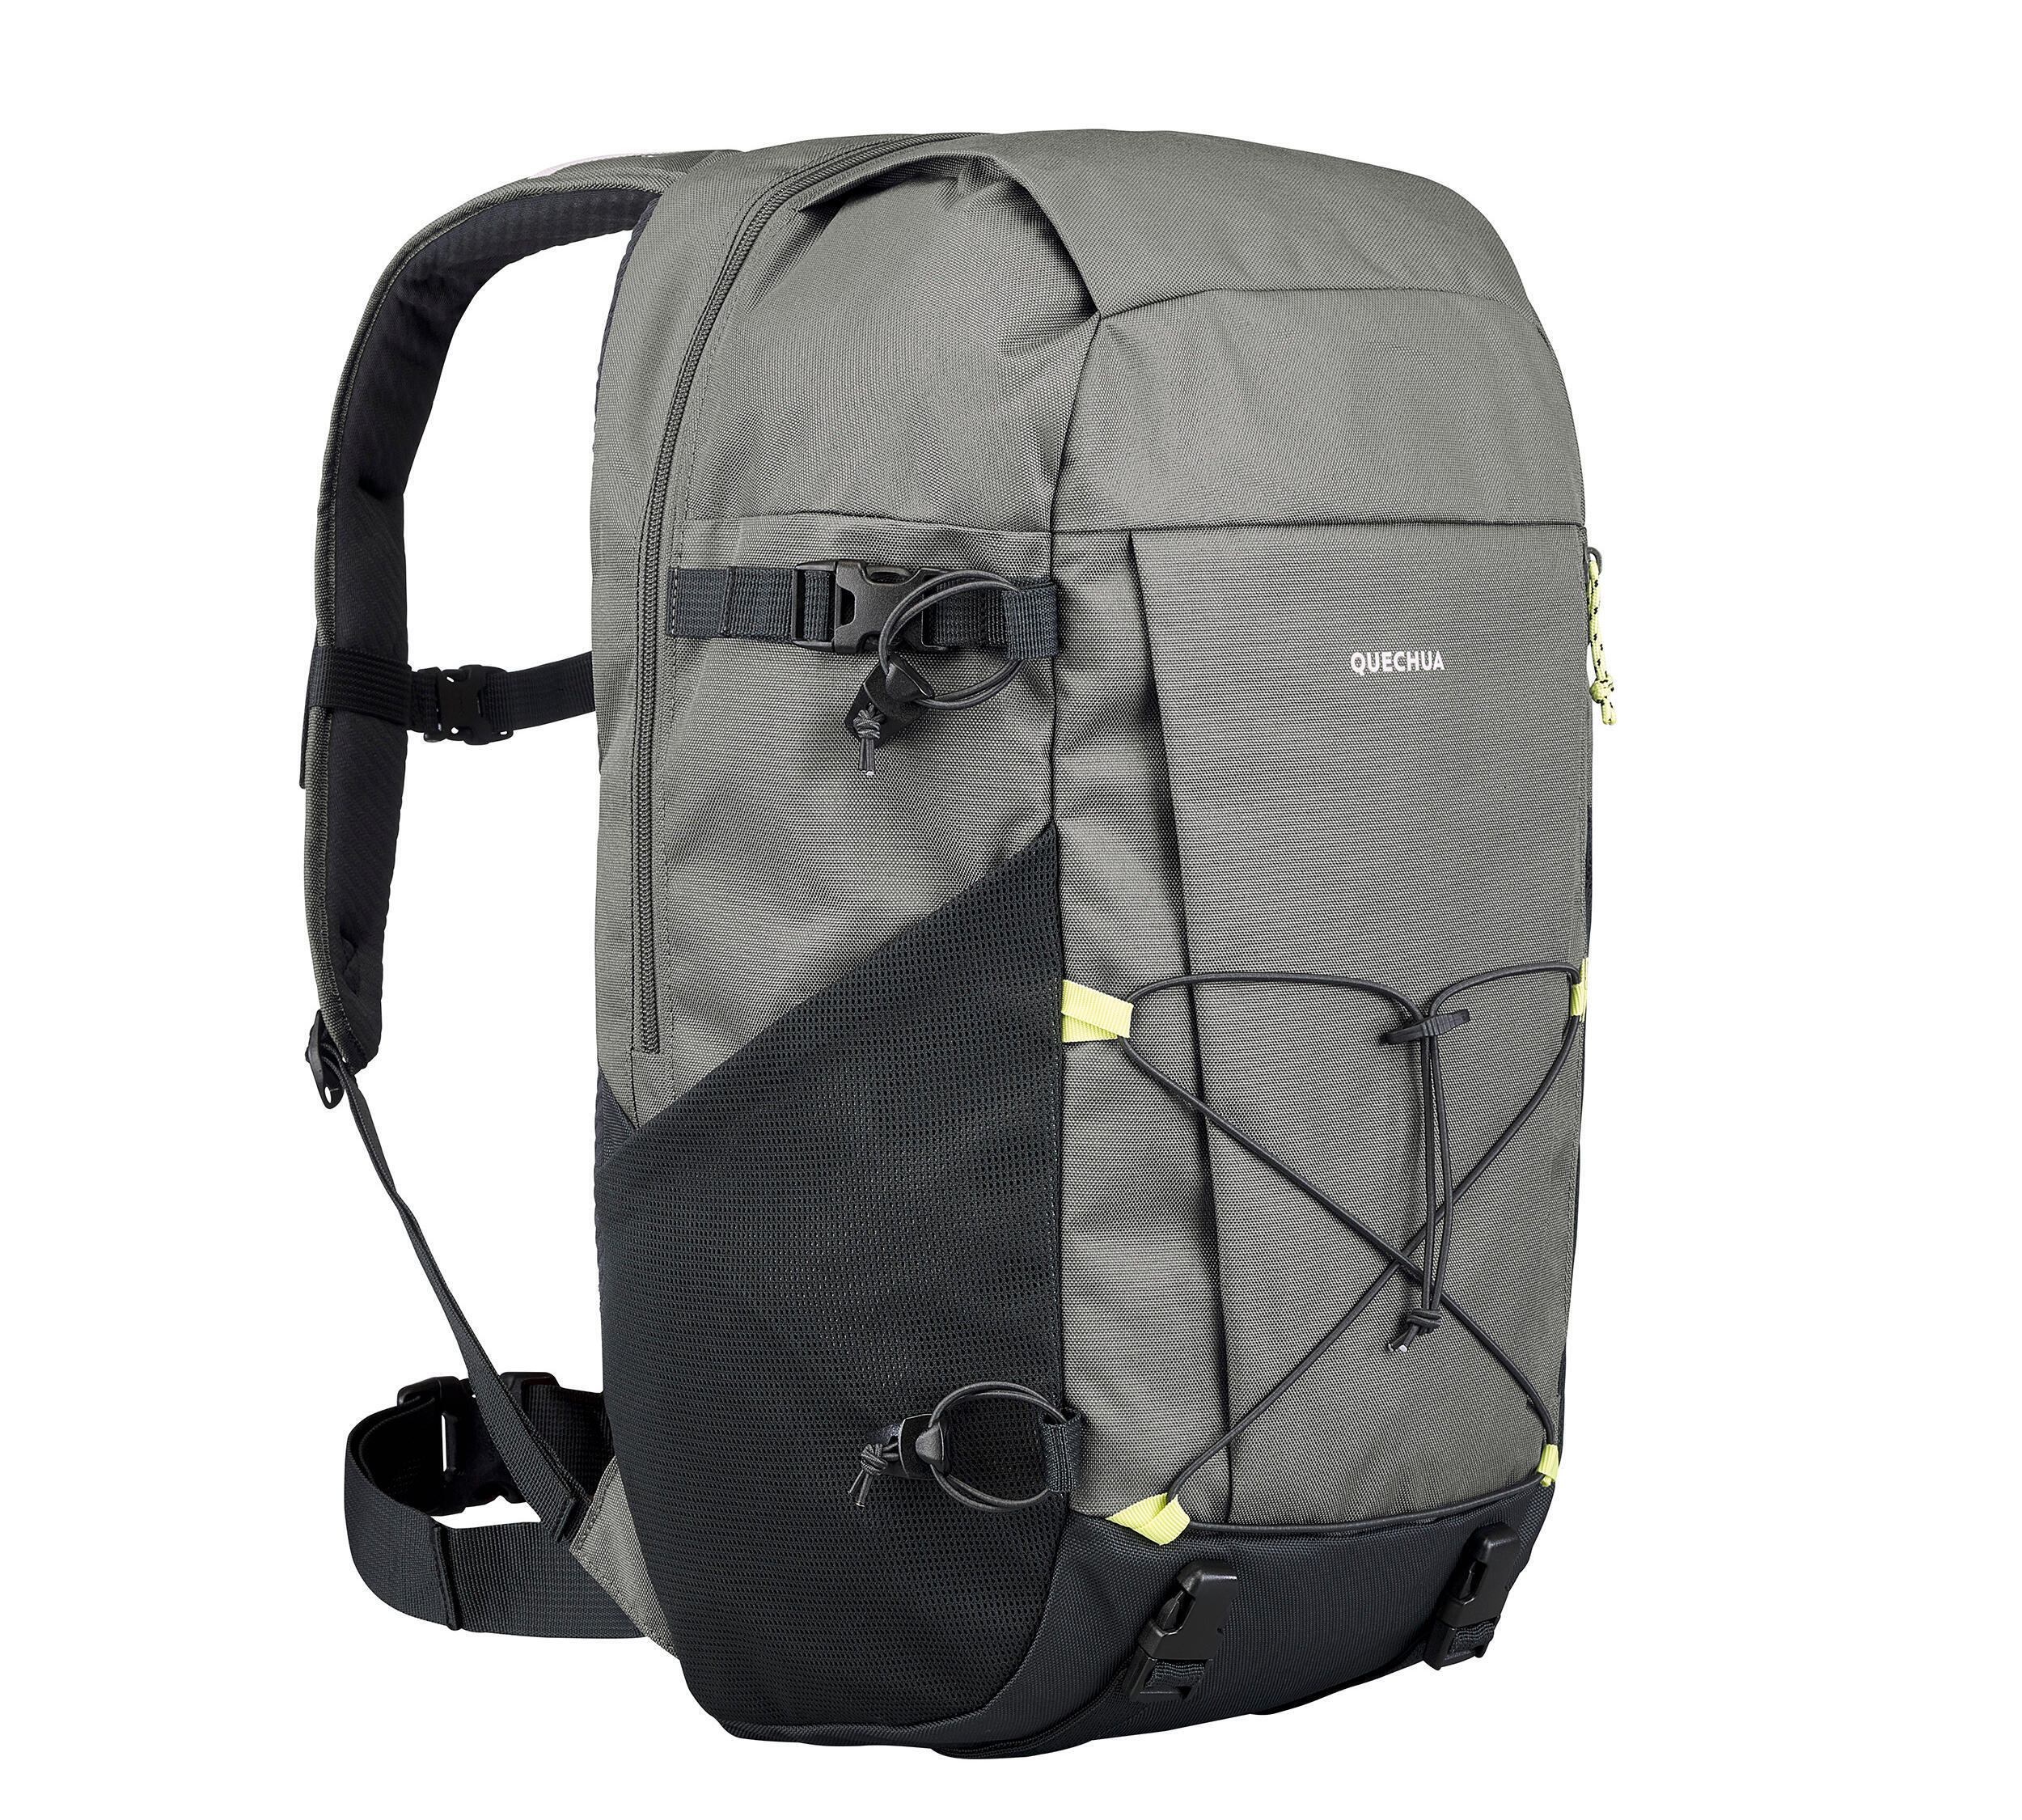 Repair your nature hiking backpack yourself